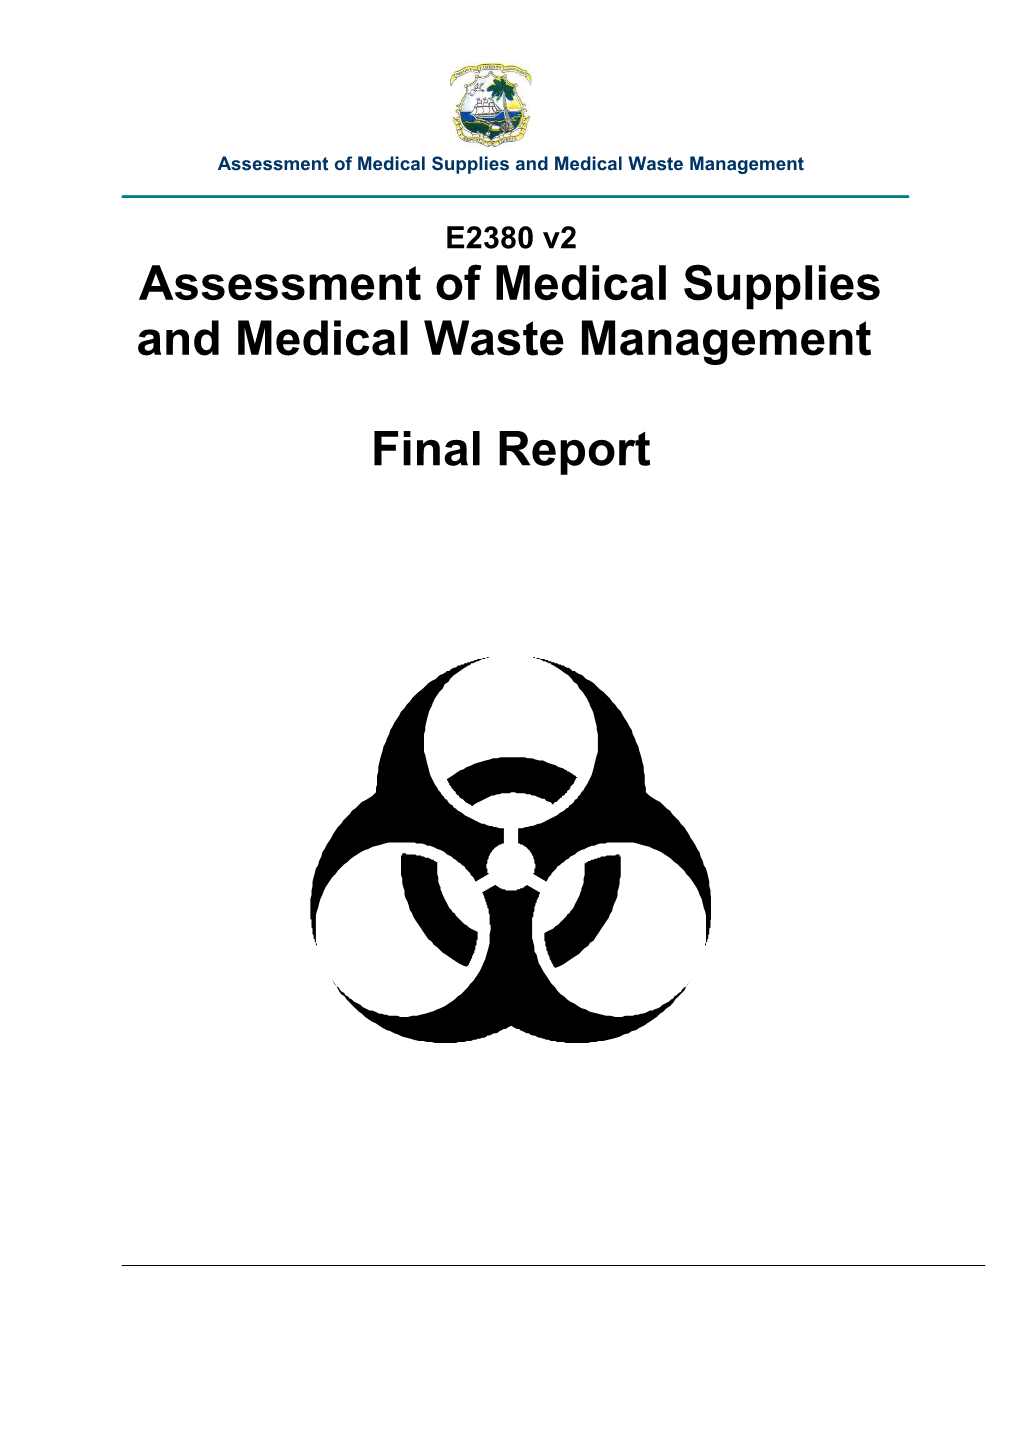 Assessment of Medical Supplies and Medical Waste Management